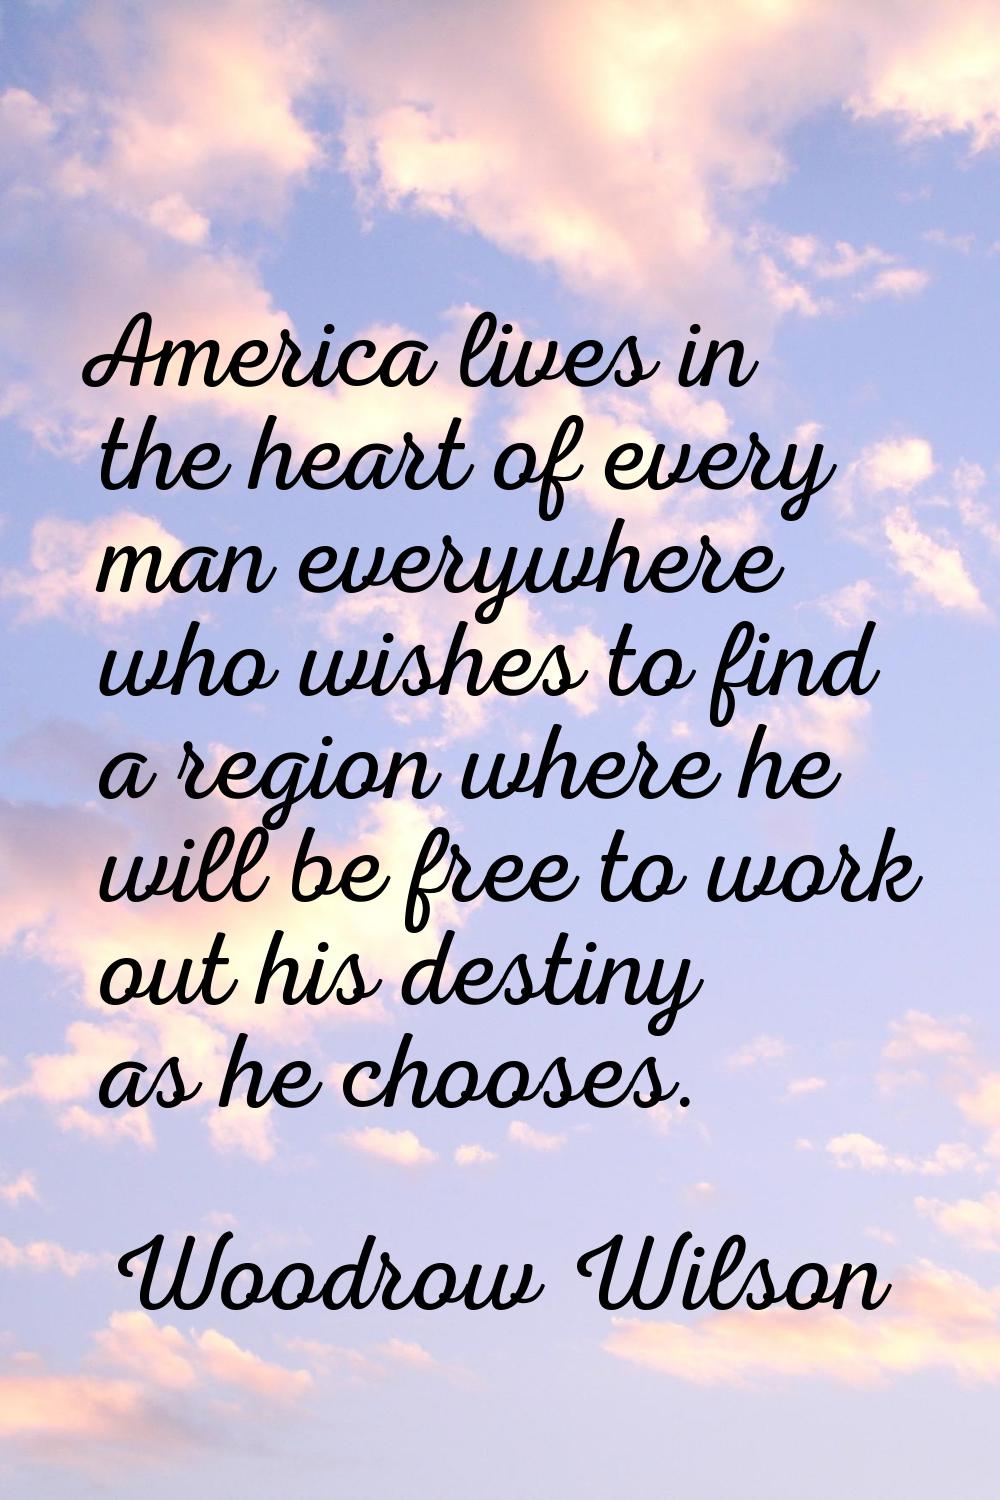 America lives in the heart of every man everywhere who wishes to find a region where he will be fre